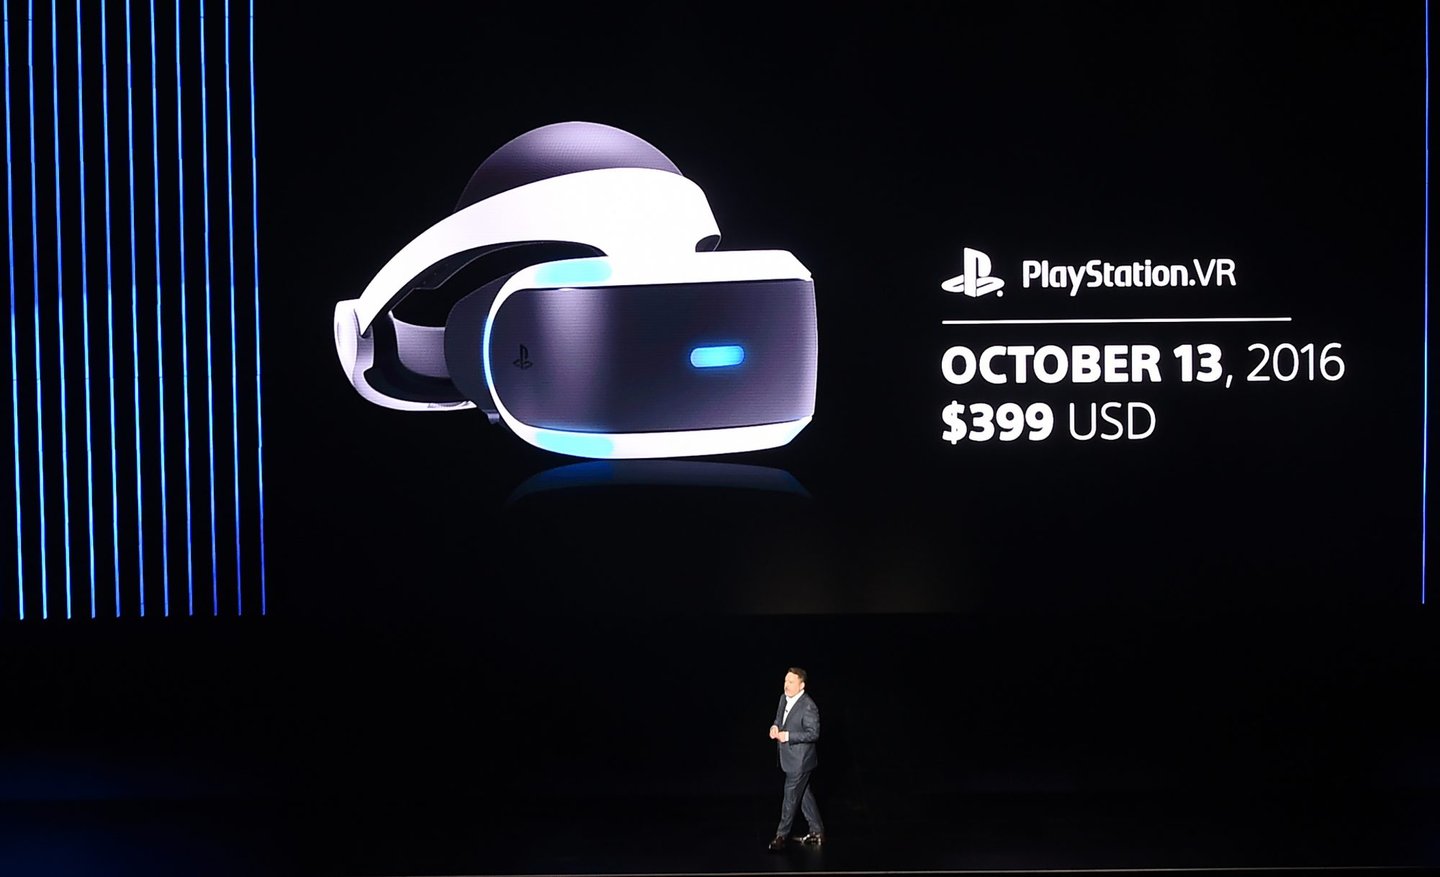 Shawn Layden, chairman of Sony Interactive Entertainment (SIE) Worldwide Studios, announces that Sonys PlayStation VR headset will be for sale on October 13, 2016 for USD $399, at the Sony PlayStation E3 press conference is underway at the Shrine Auditorium in Los Angeles, California, June 13, 2016. / AFP / ROBYN BECK (Photo credit should read ROBYN BECK/AFP/Getty Images)